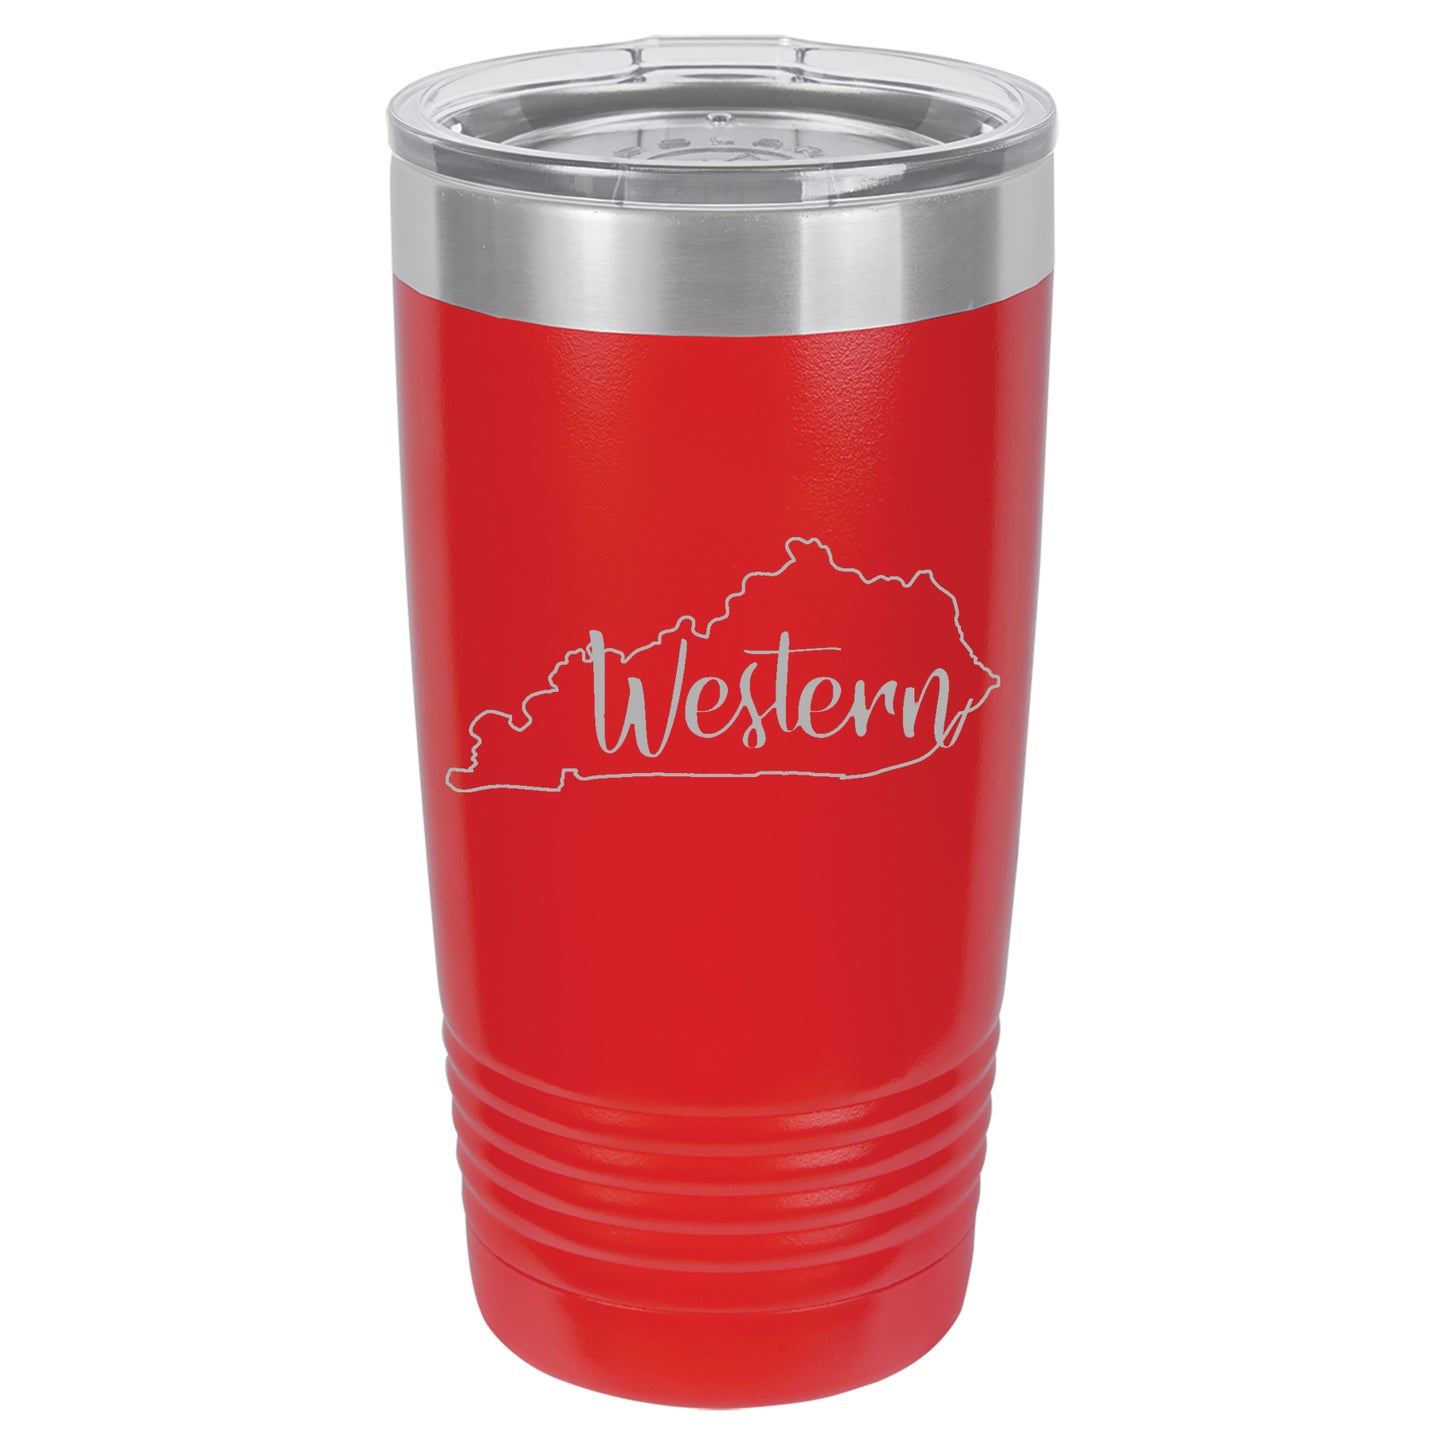 Stainless Steel/Powder Coated Tumbler